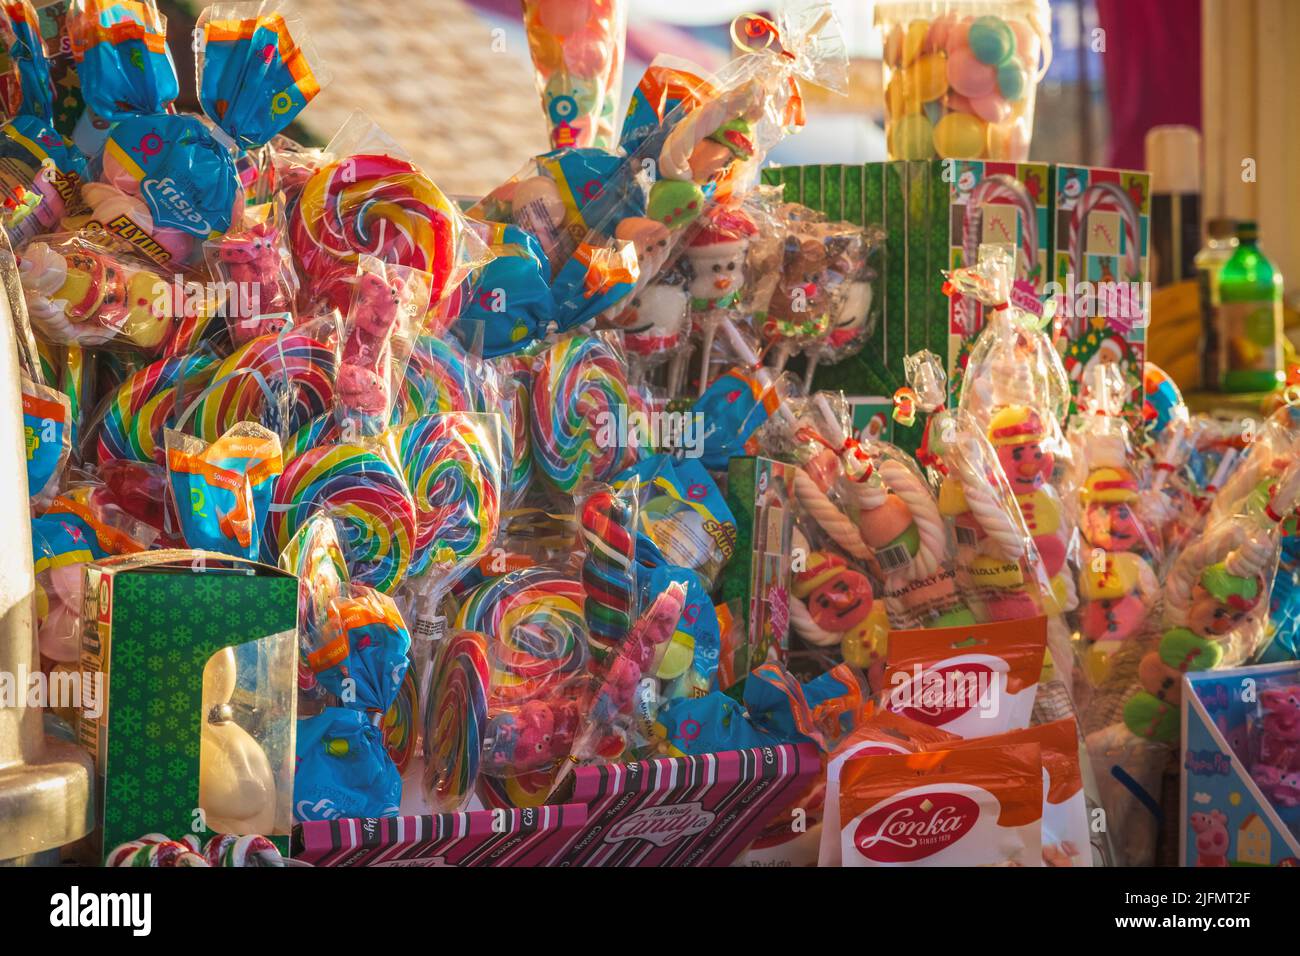 London, UK - 2 December, 2021 - Sweets on display at a confectionery stall of Christmas market Hyde Park Winter Wonderland Stock Photo